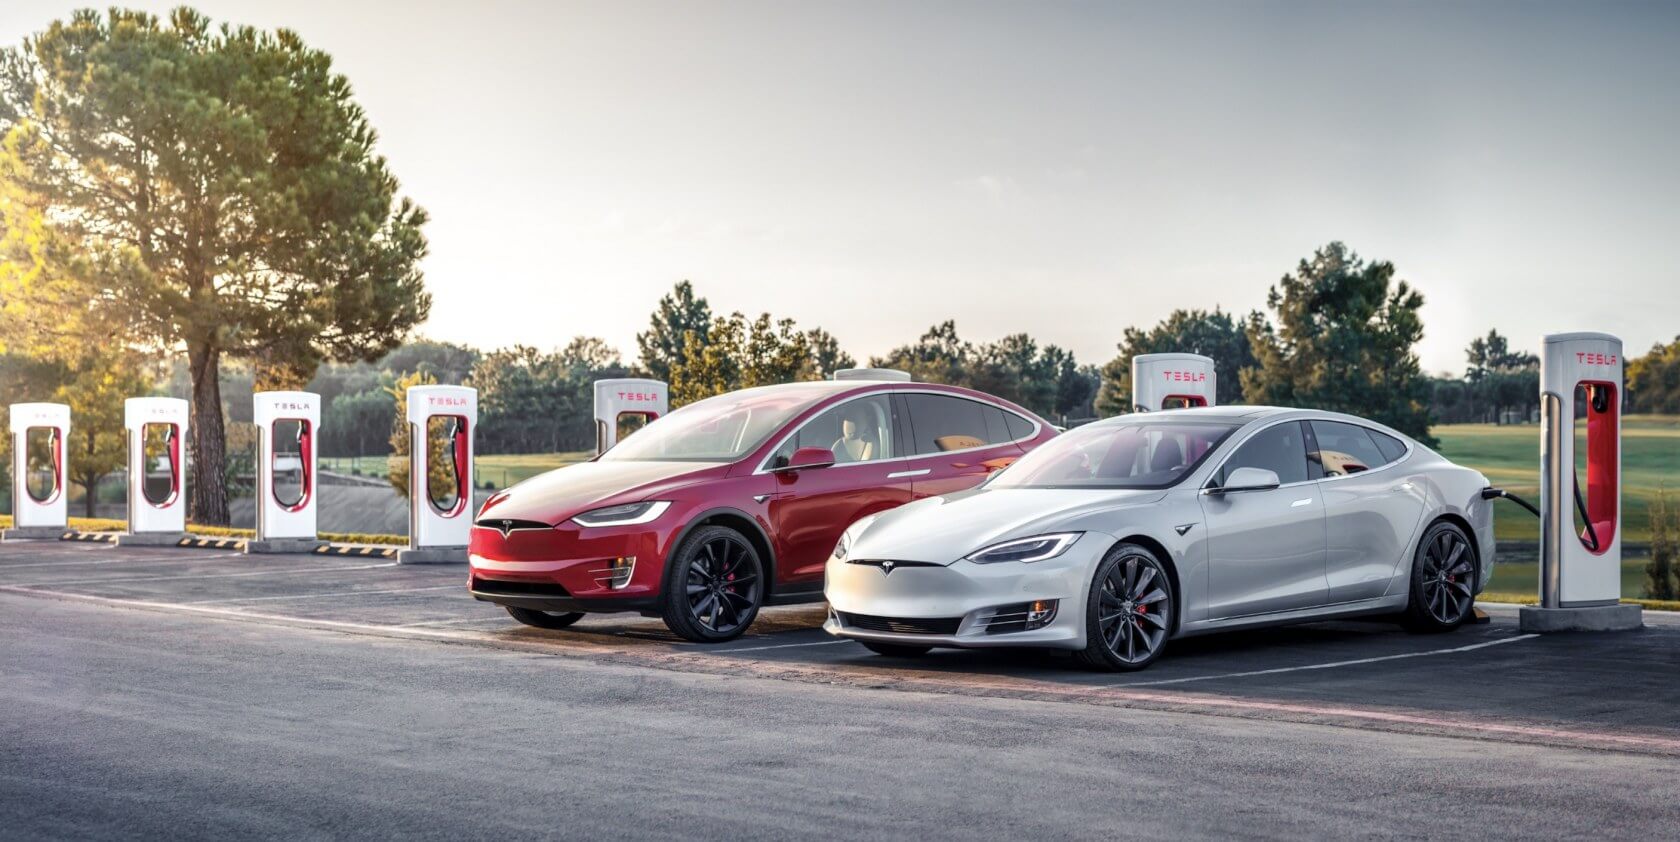 Tesla starts selling $10,000-cheaper Model S and Model X variants with shorter ranges